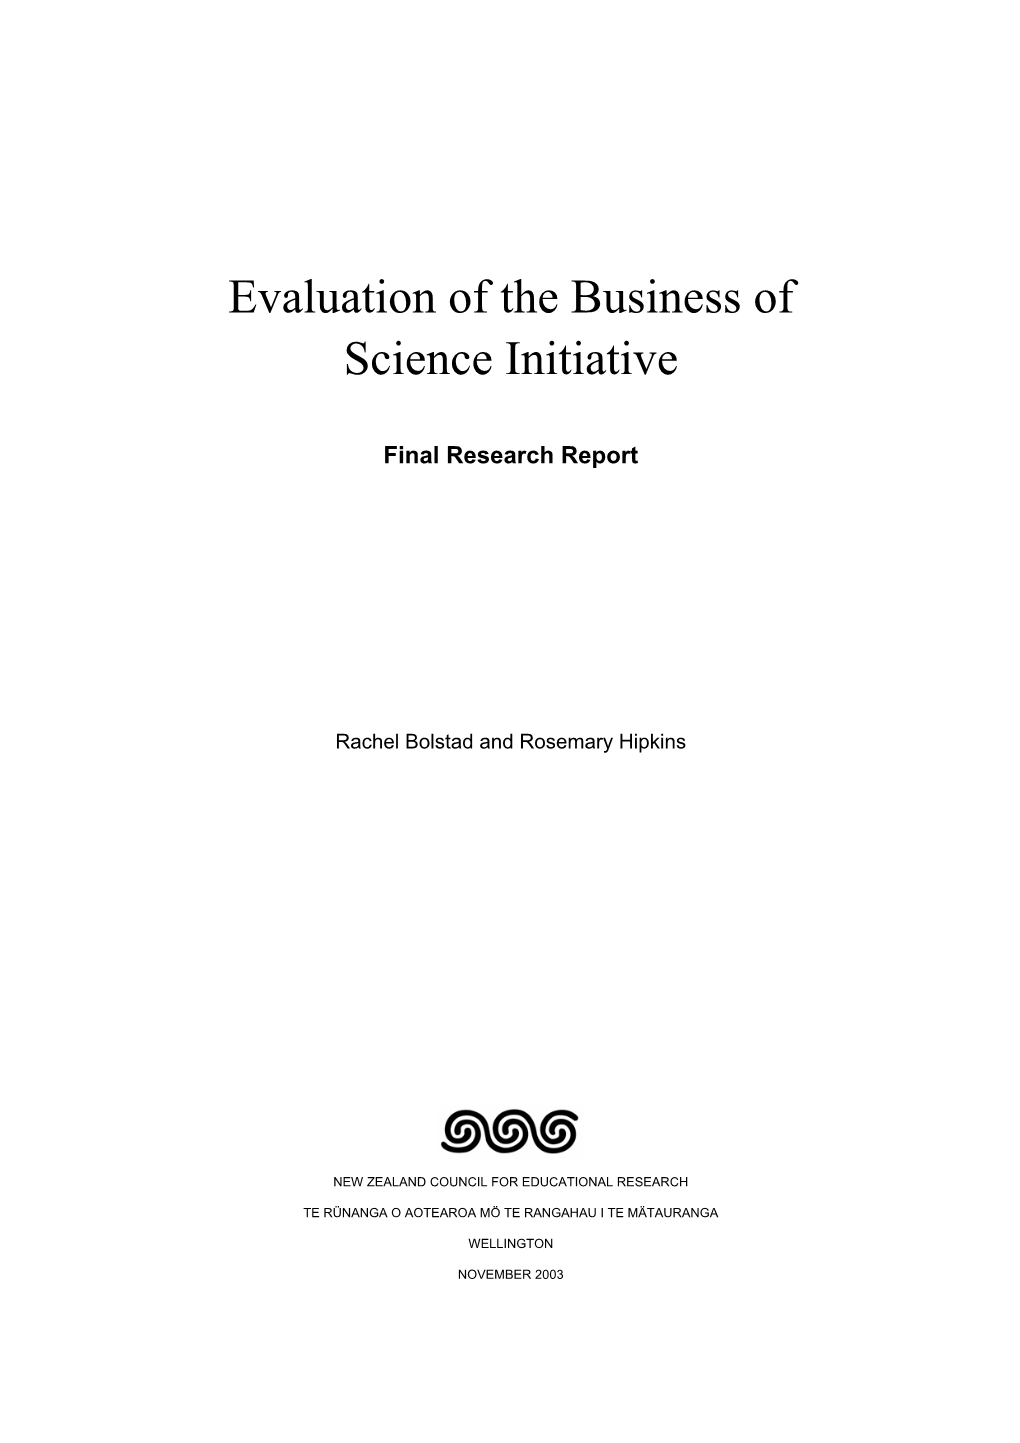 Evaluation of the Business of Science Initiative